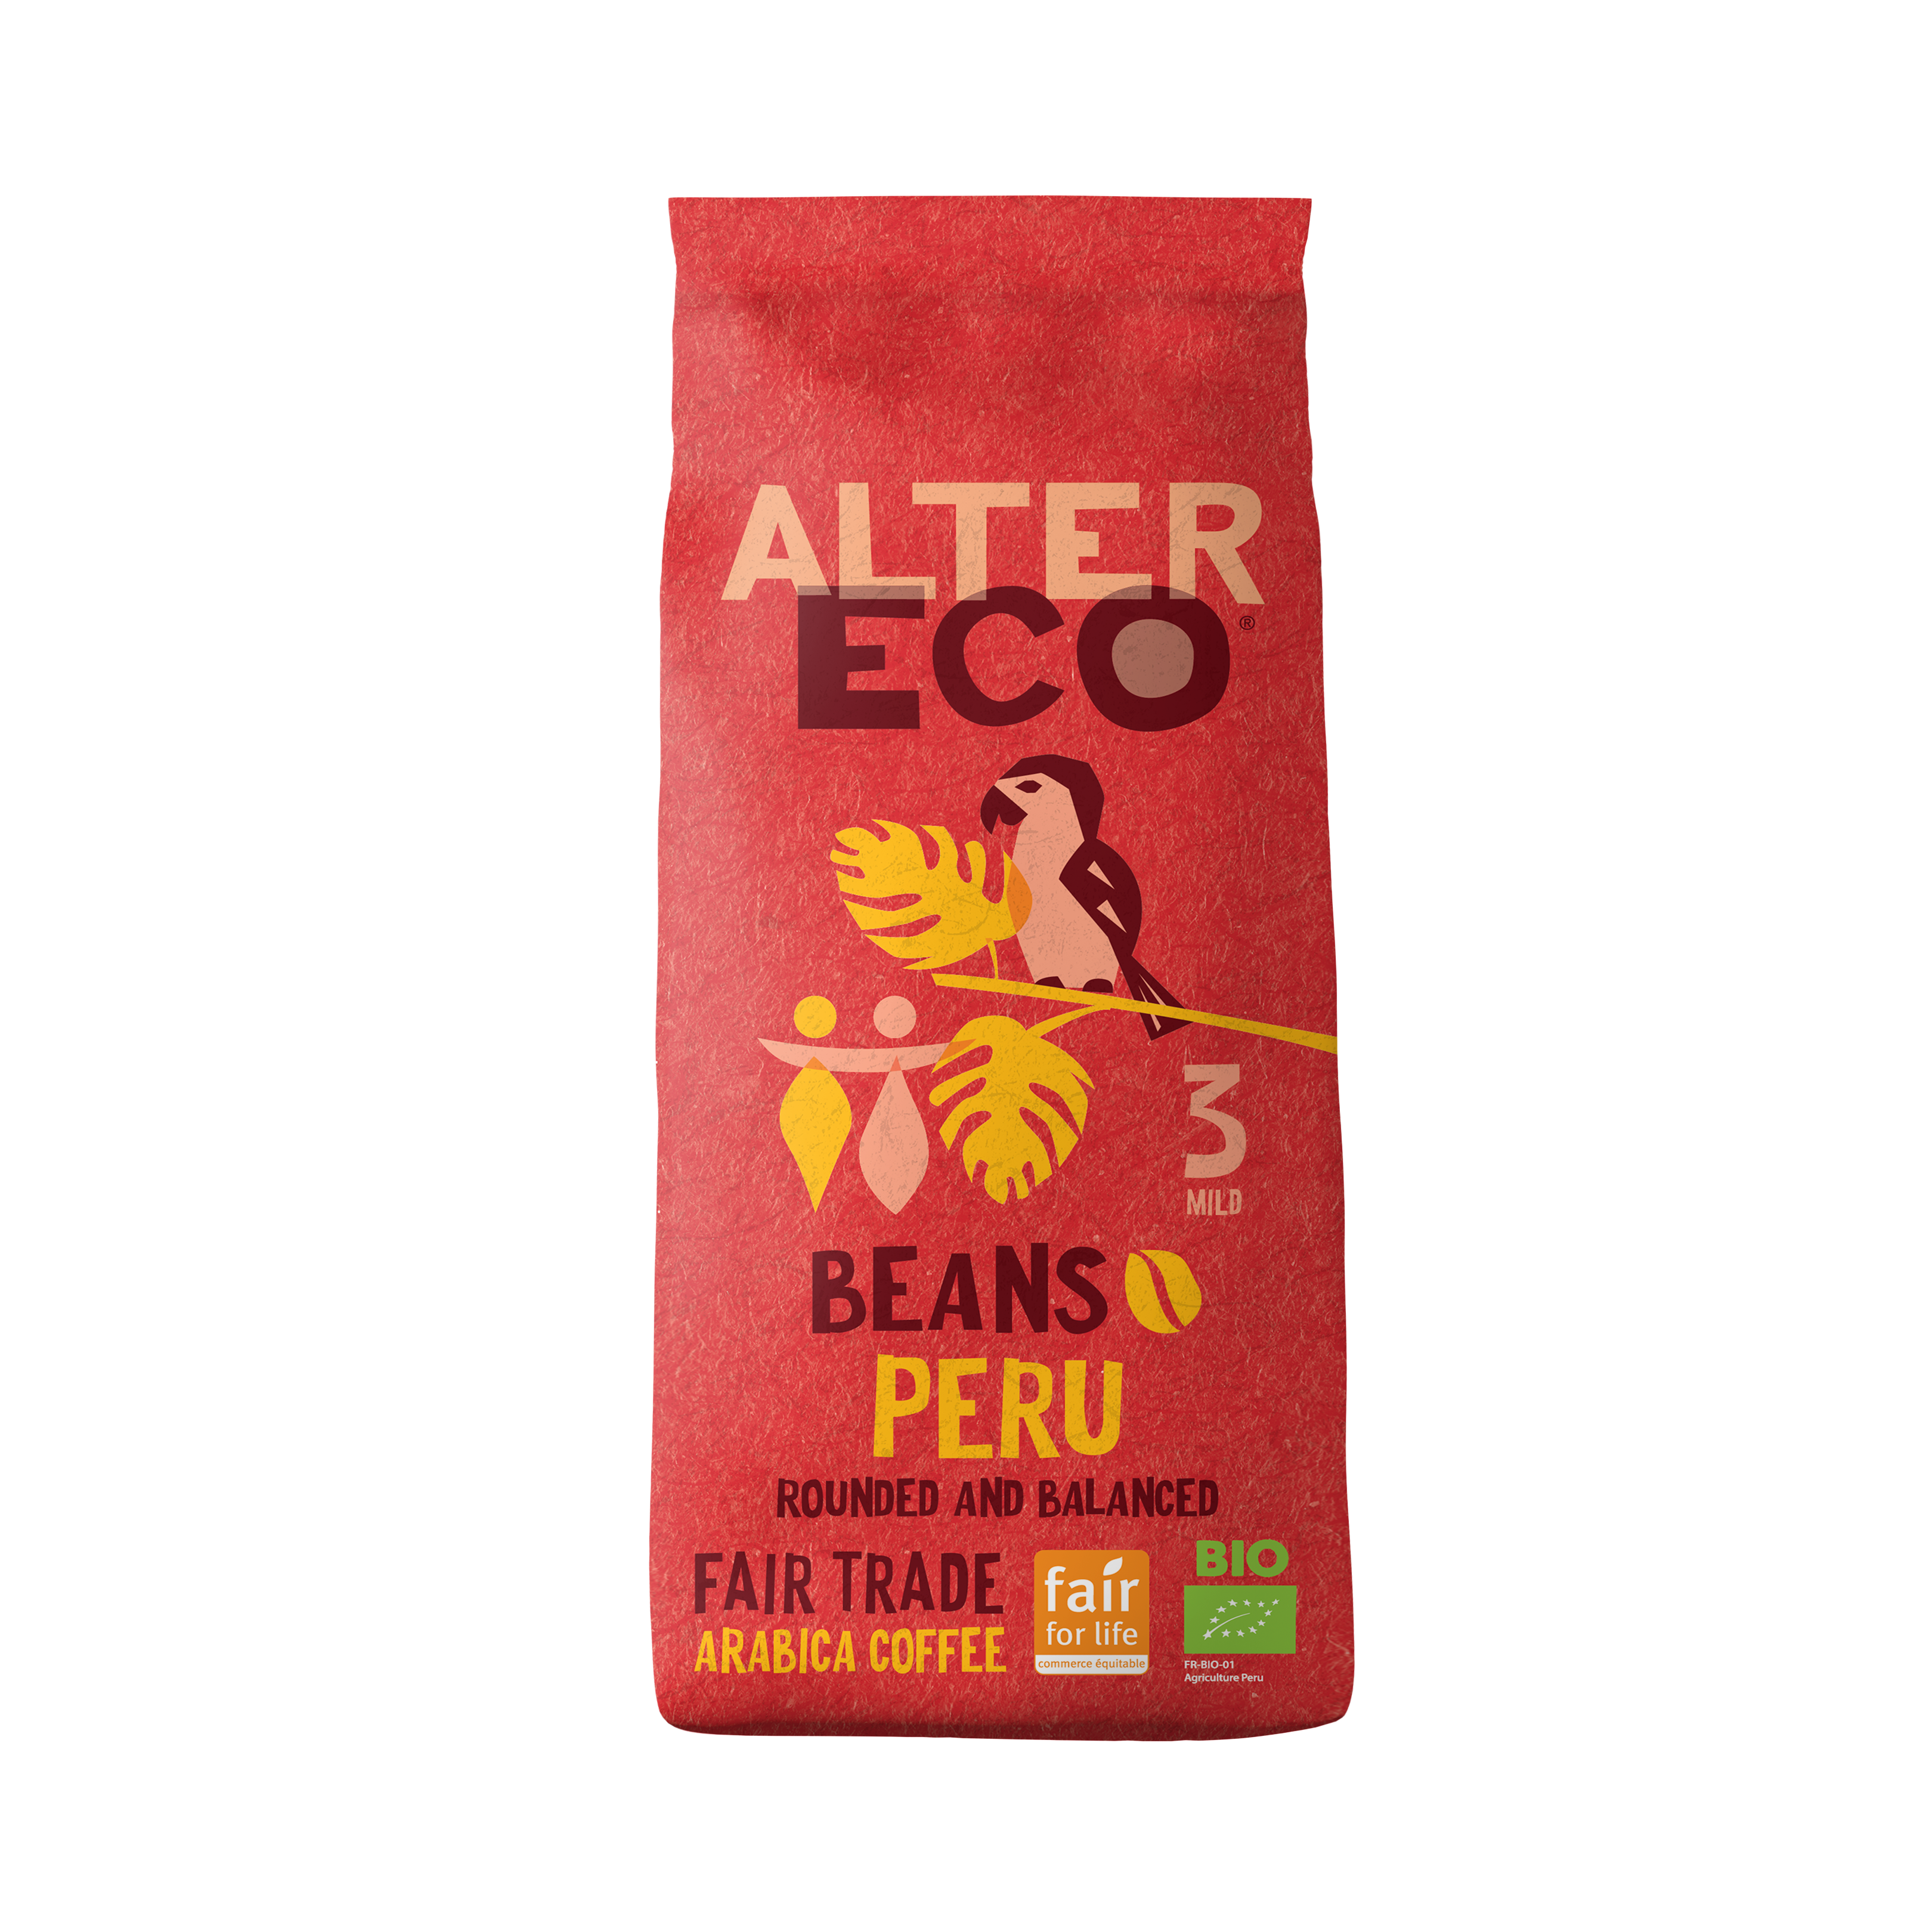 Alter Eco - Beans Peru - Front